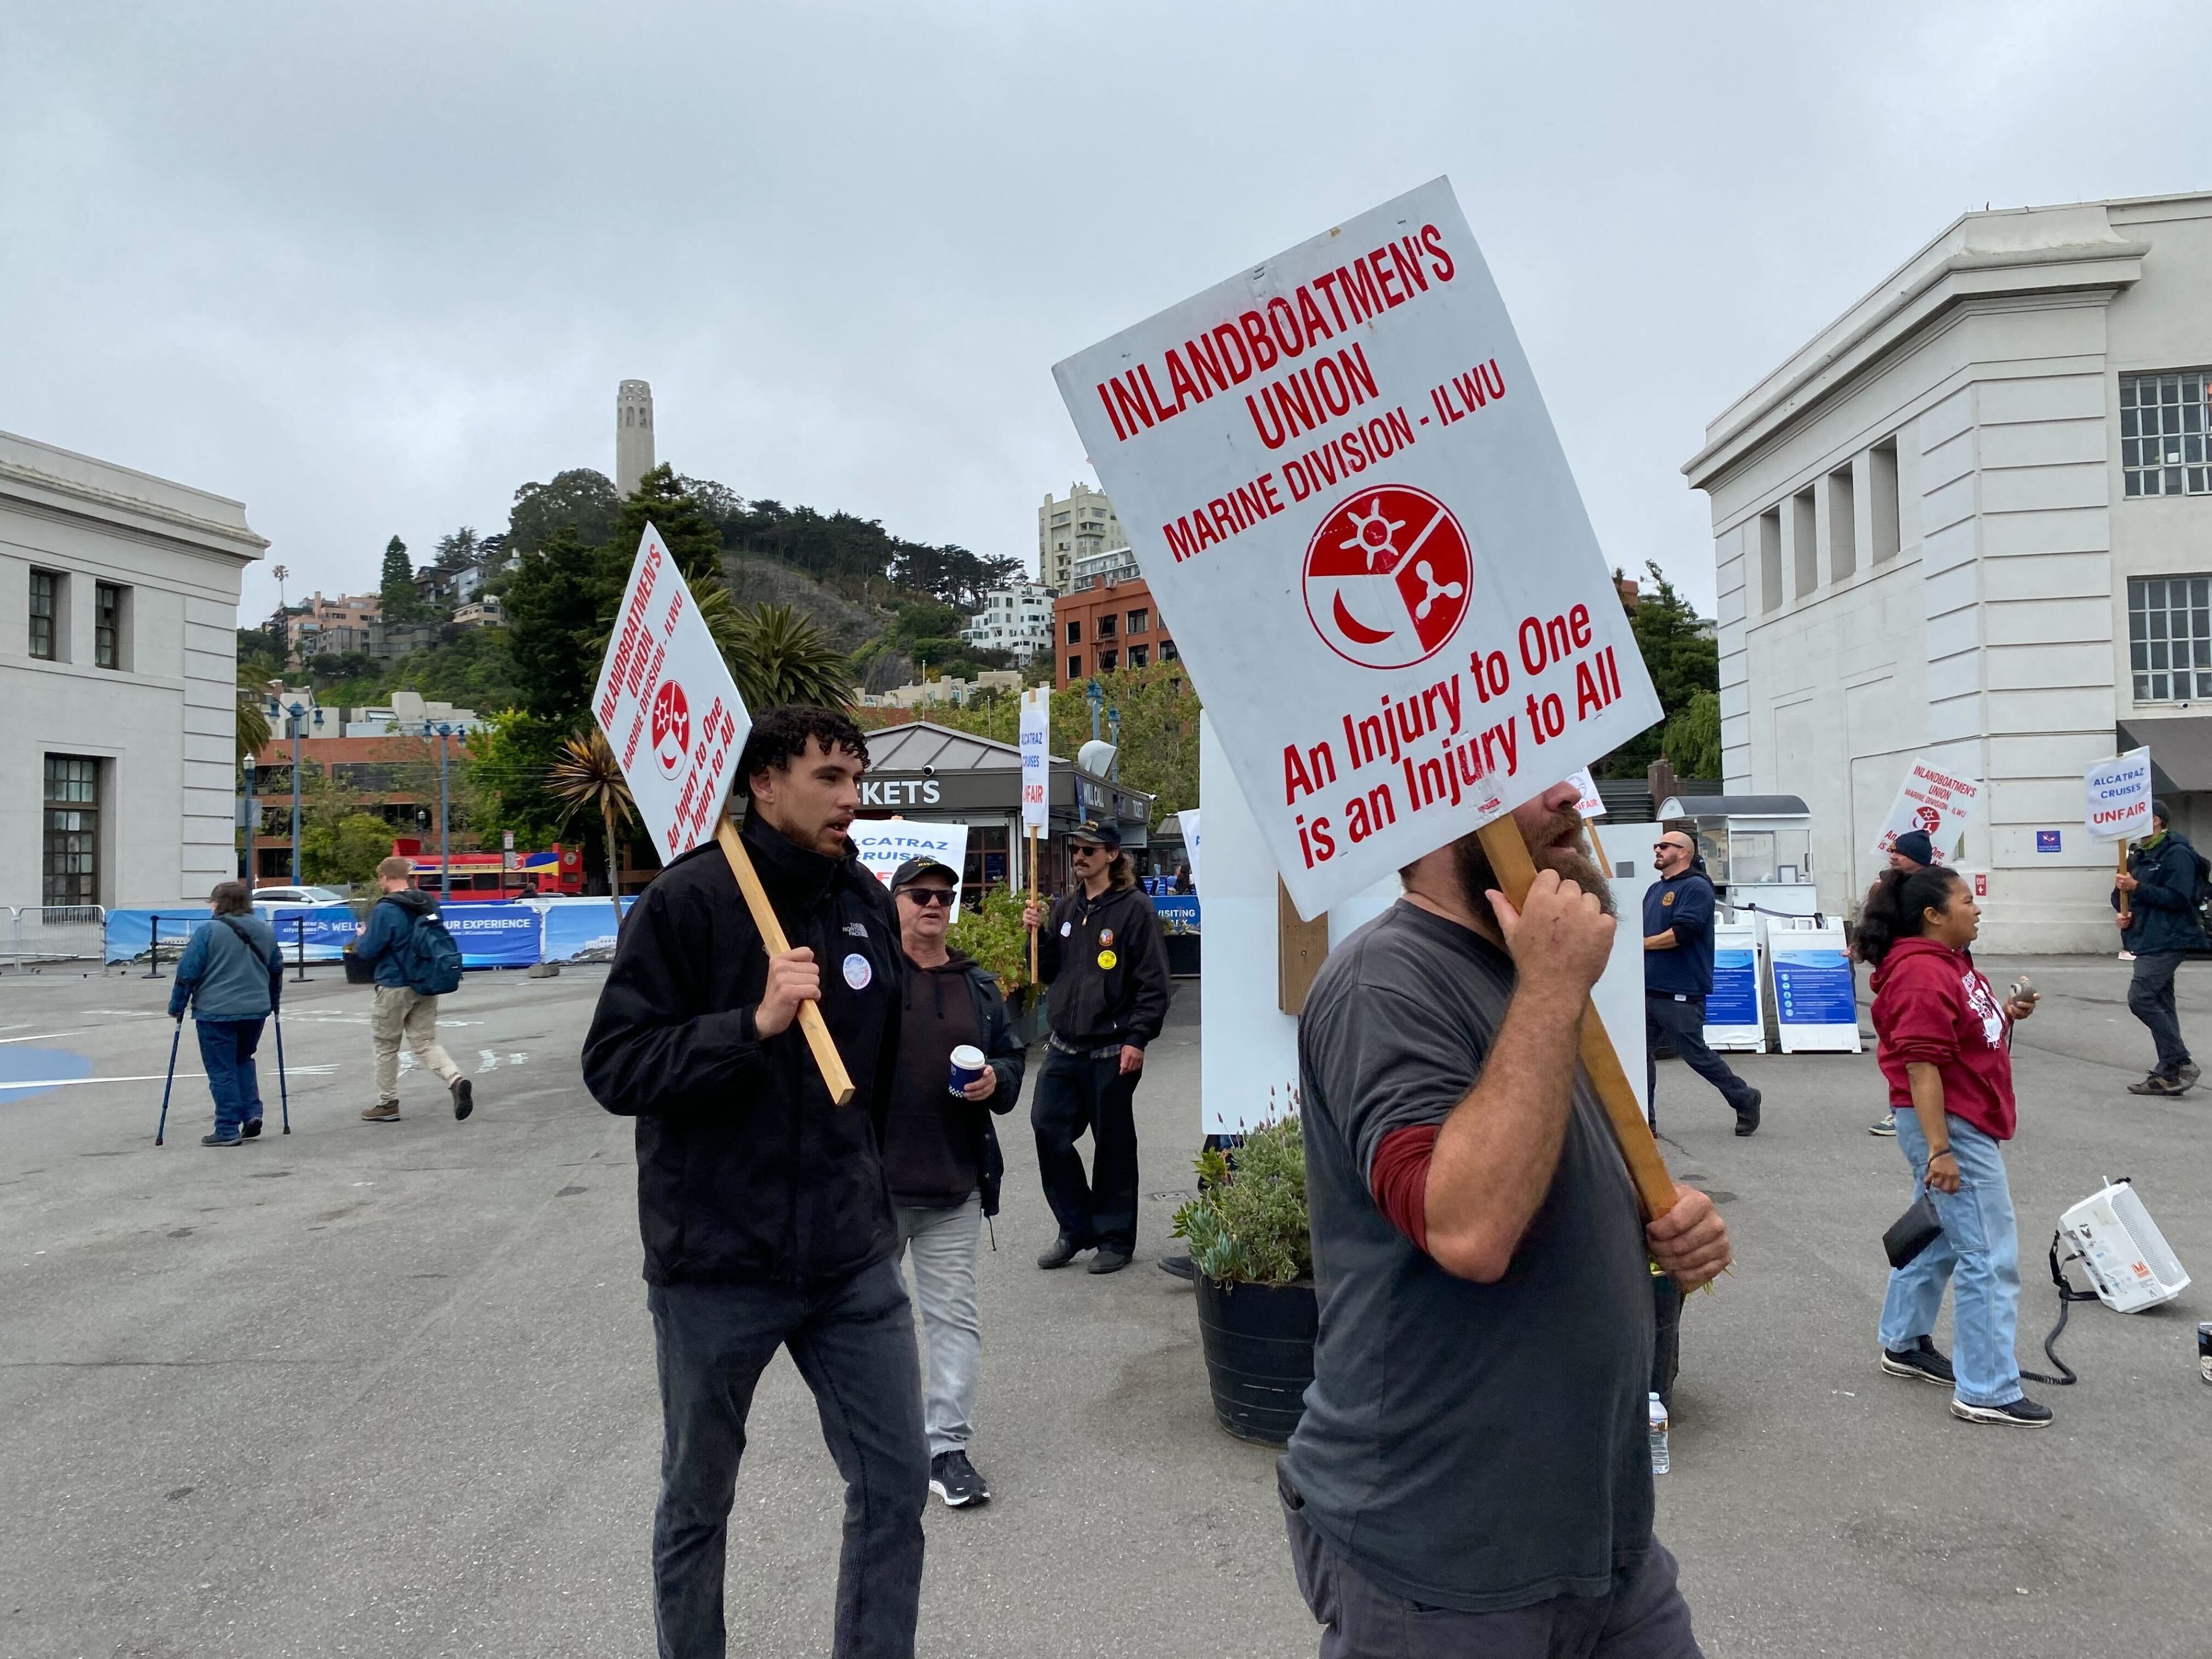 People are protesting outdoors, holding signs that read, "Inlandboatmen's Union, Marine Division - ILWU. An Injury to One is an Injury to All." A tall structure and buildings are in the background.